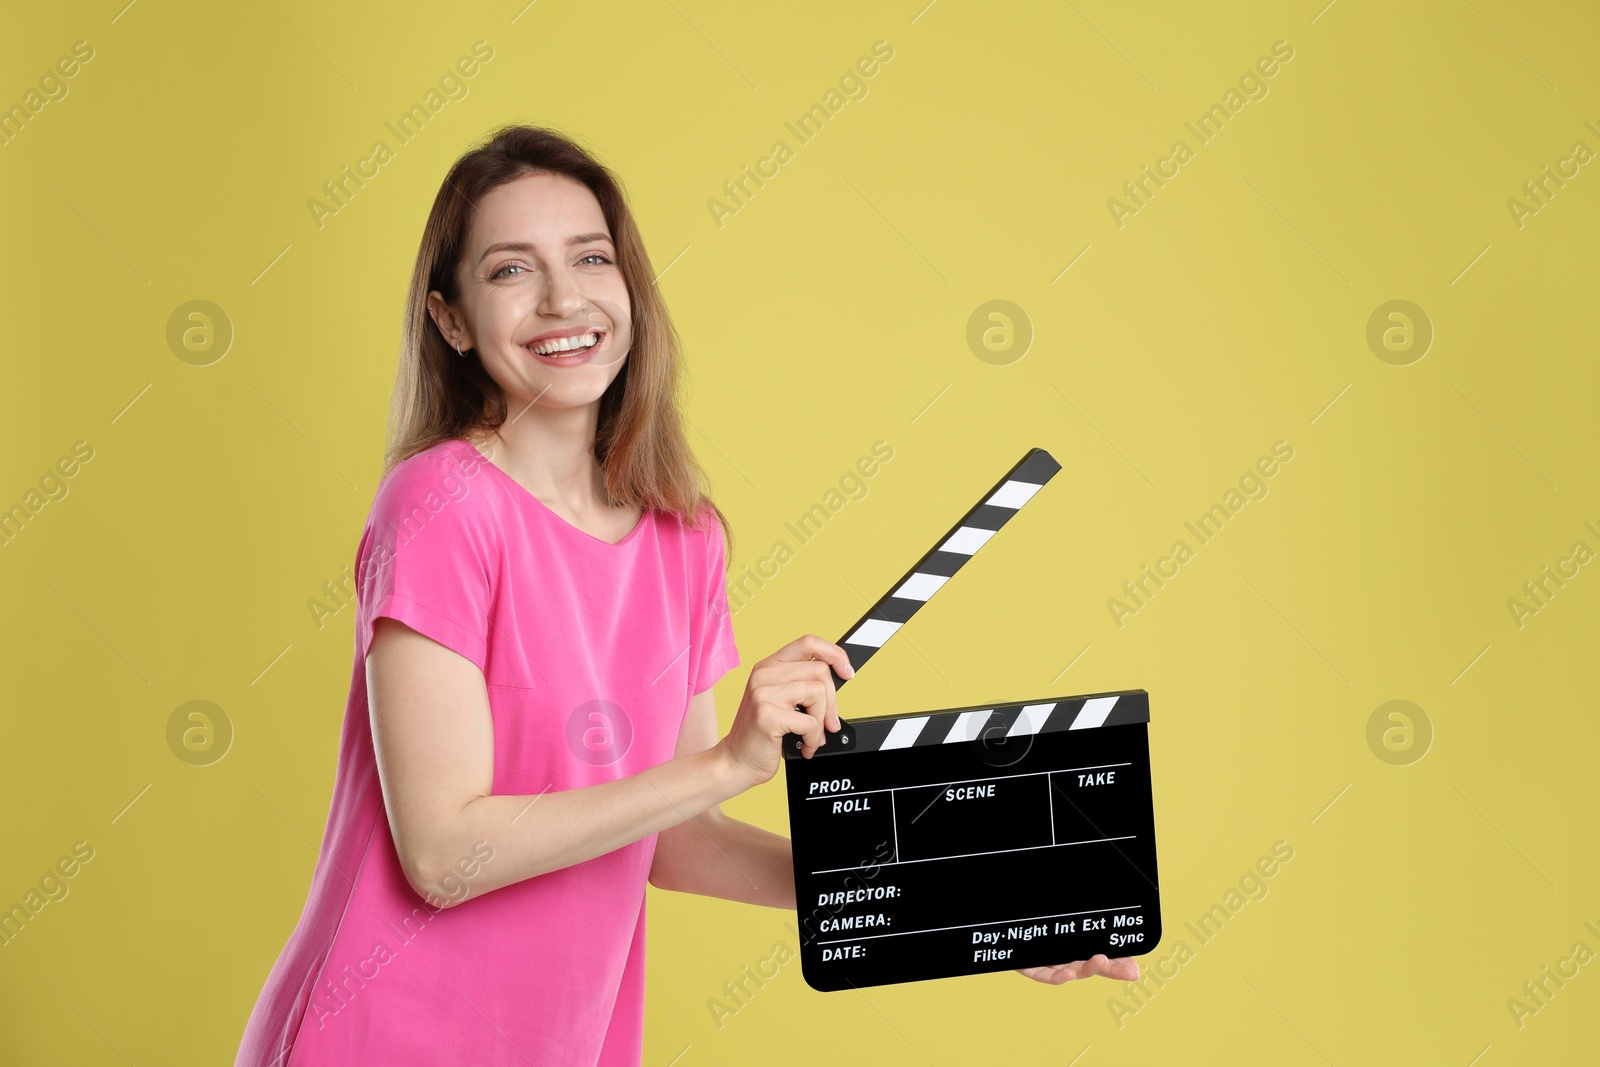 Photo of Making movie. Smiling woman with clapperboard on yellow background